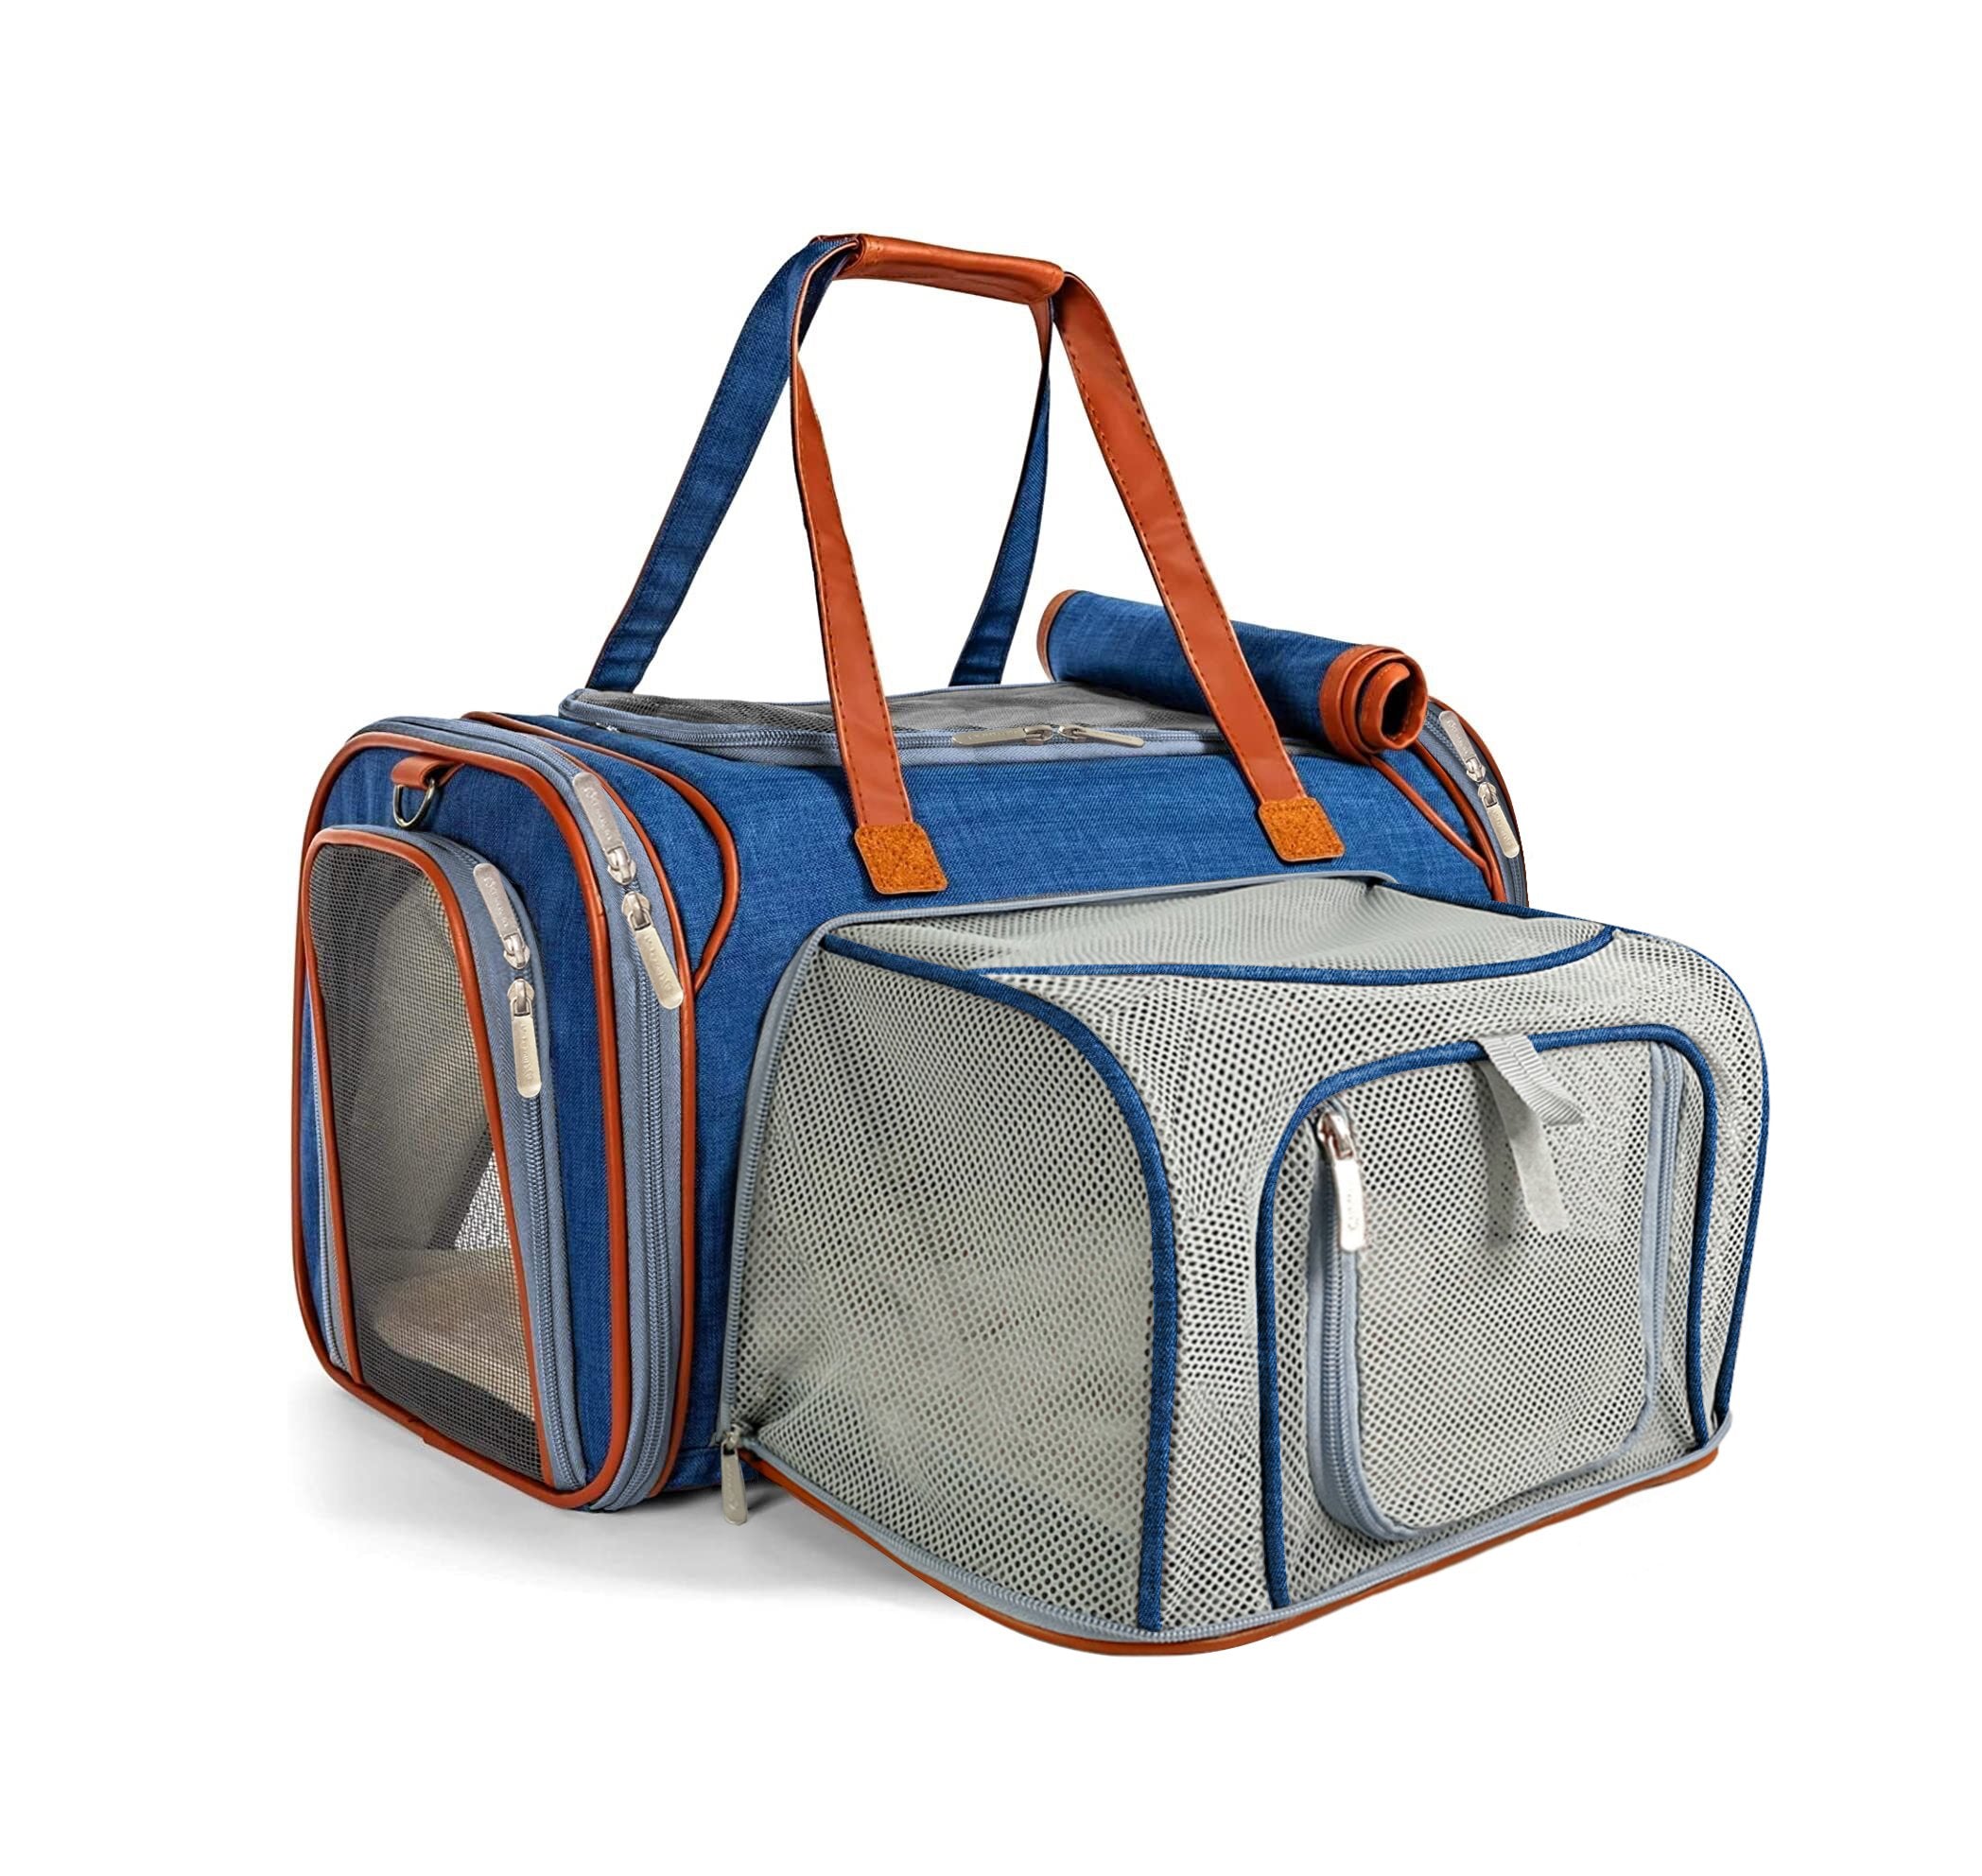 Gold Series Expandable Airline Approved Soft Sided Pet Carrier by Mr. Peanut&s (Deja Blue)